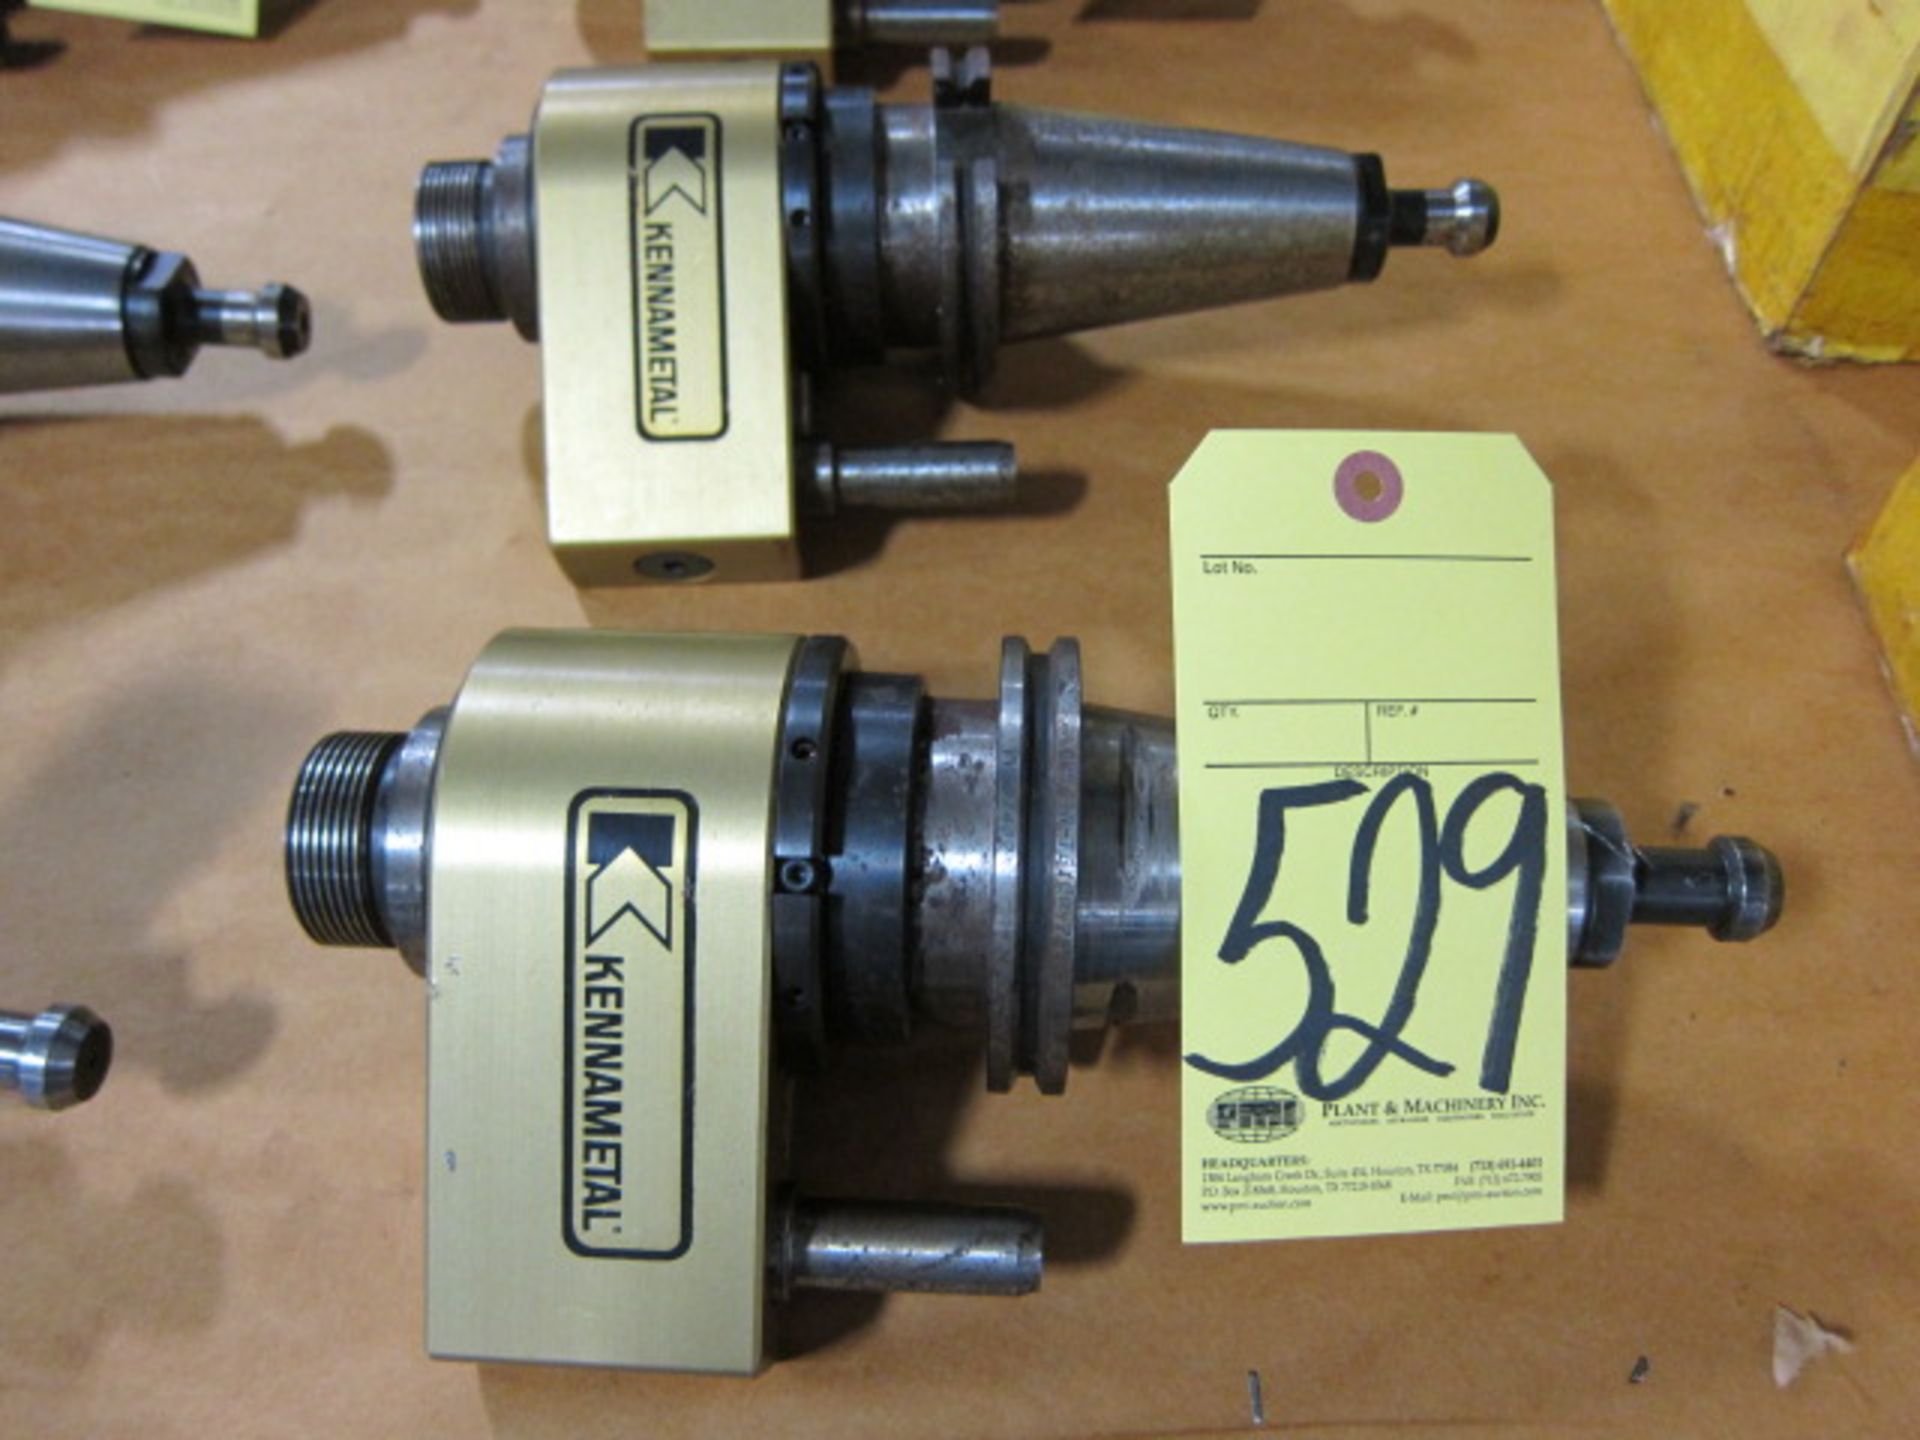 LOT OF ROTARY COOLANT HEADS (2), KENNAMETAL, CAT-50 taper